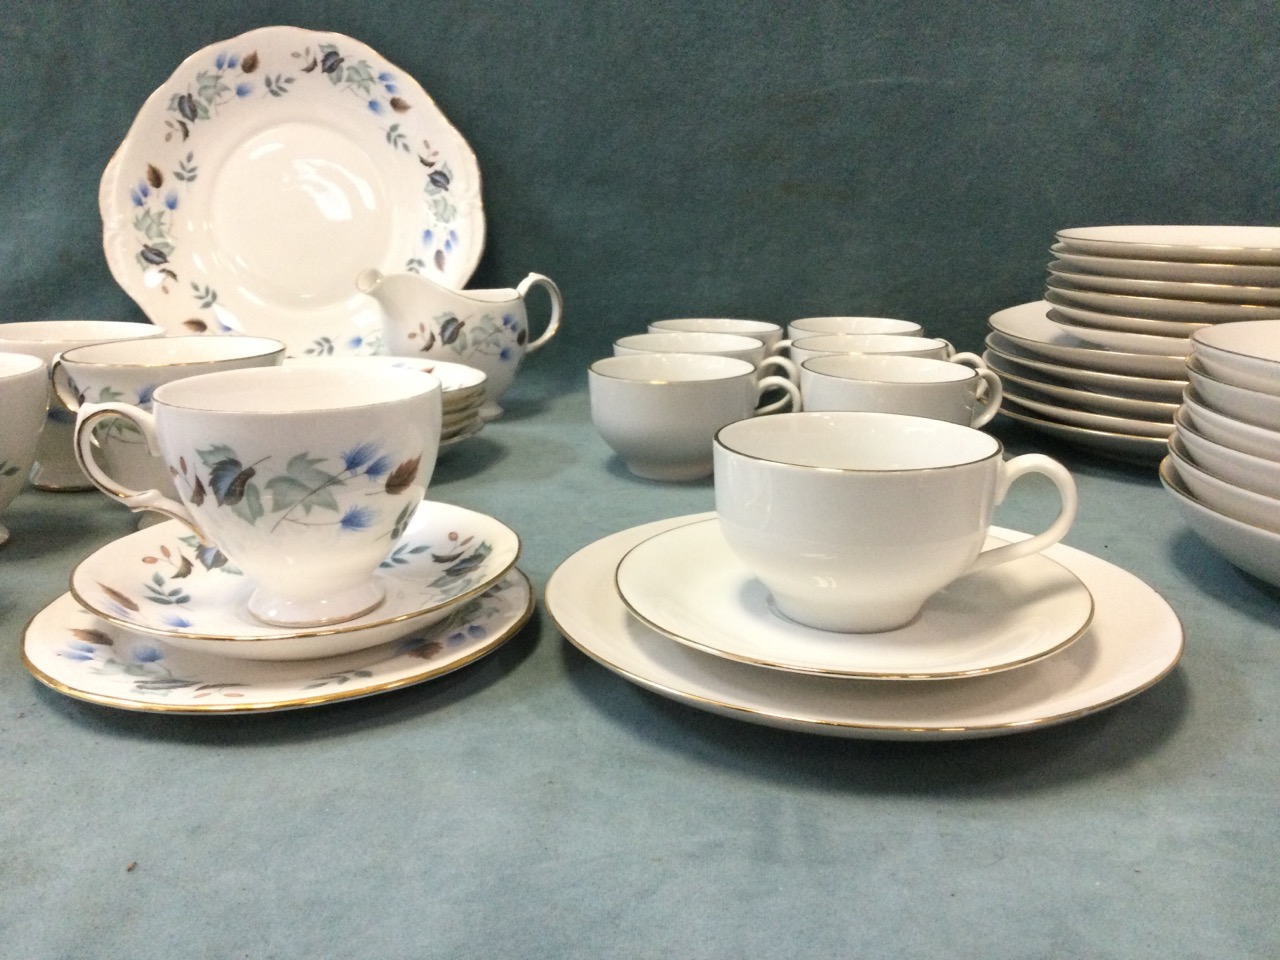 A contemporary Harmony gilt edged white porcelain dinner service with dinner plates, side plates, - Image 2 of 3